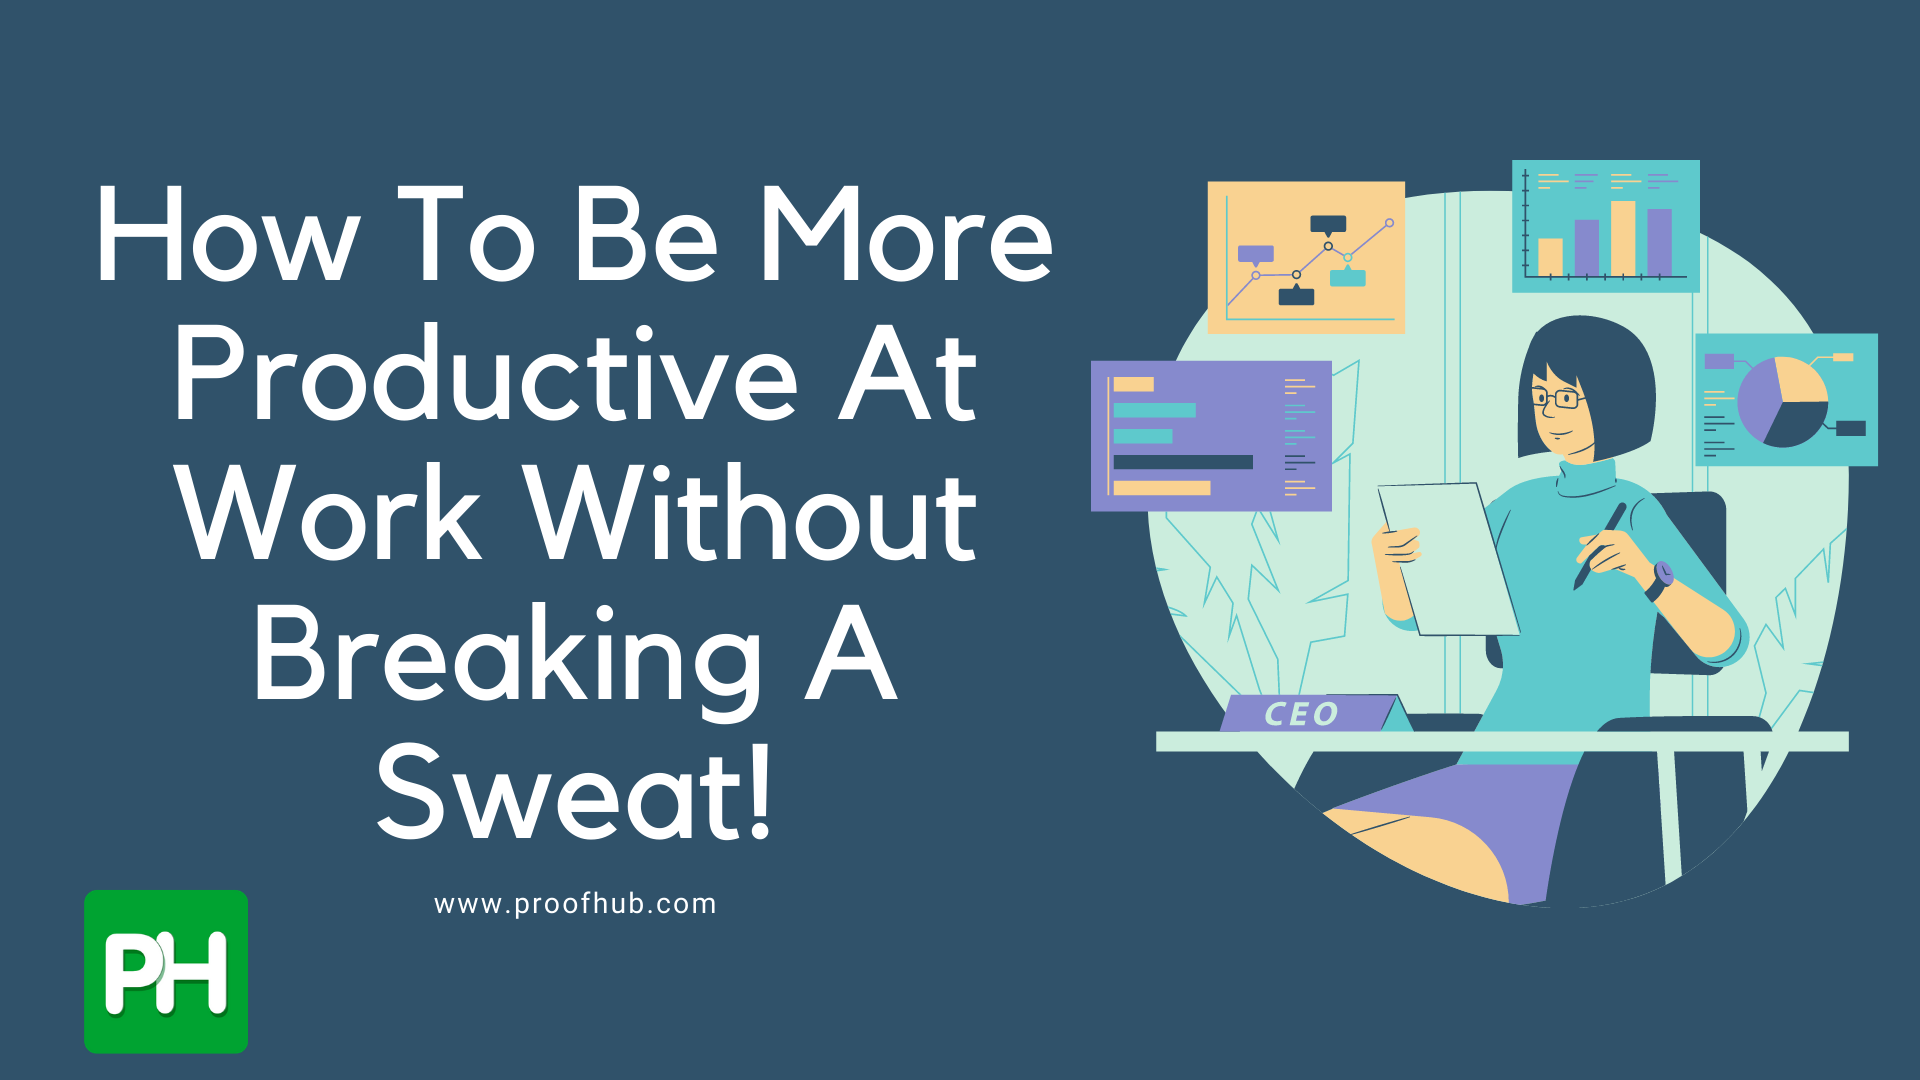 How To Be More Productive At Work Without Breaking A Sweat!